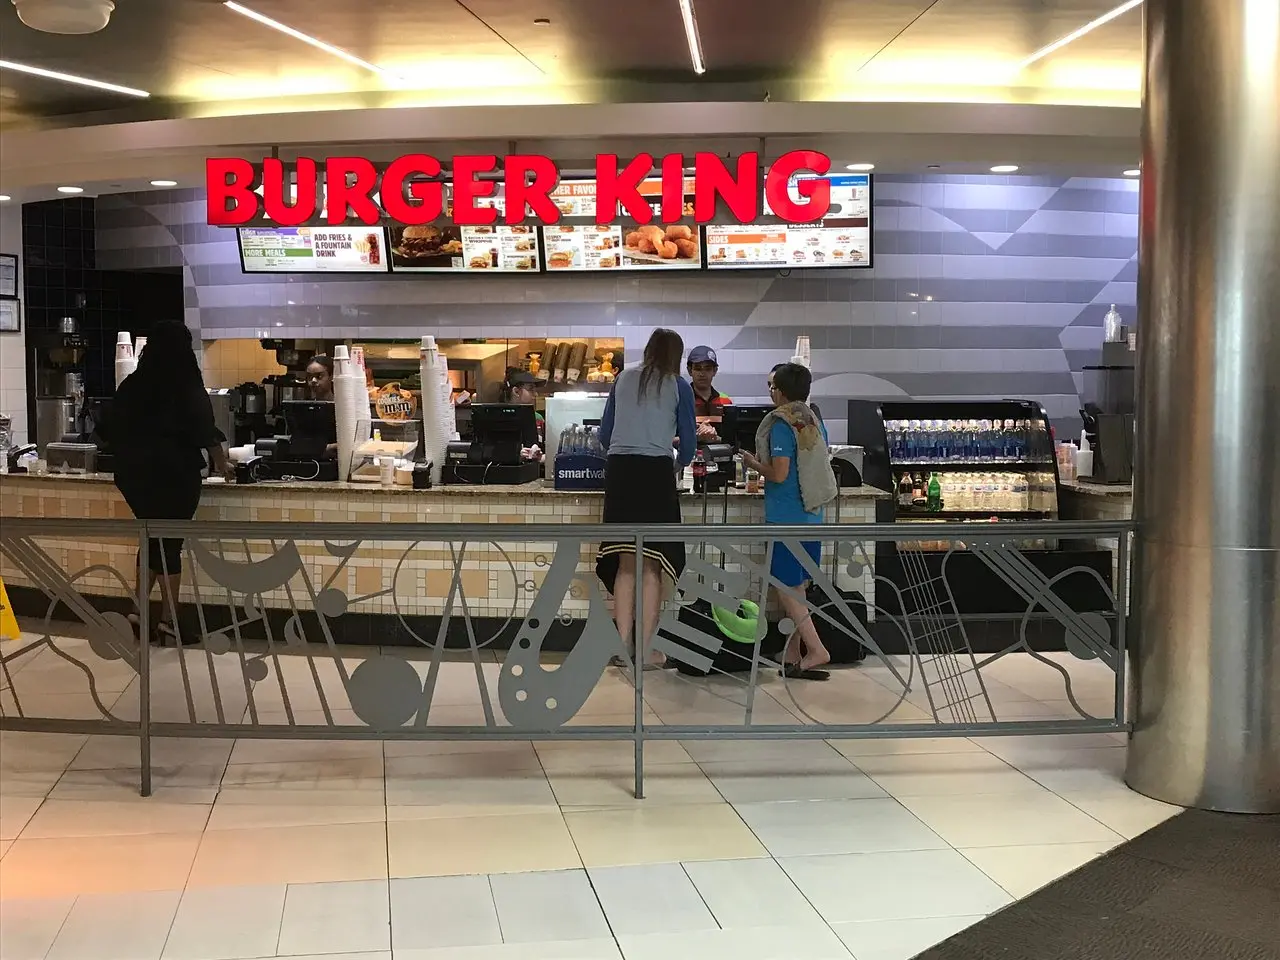 Photo of a Burger King storefront